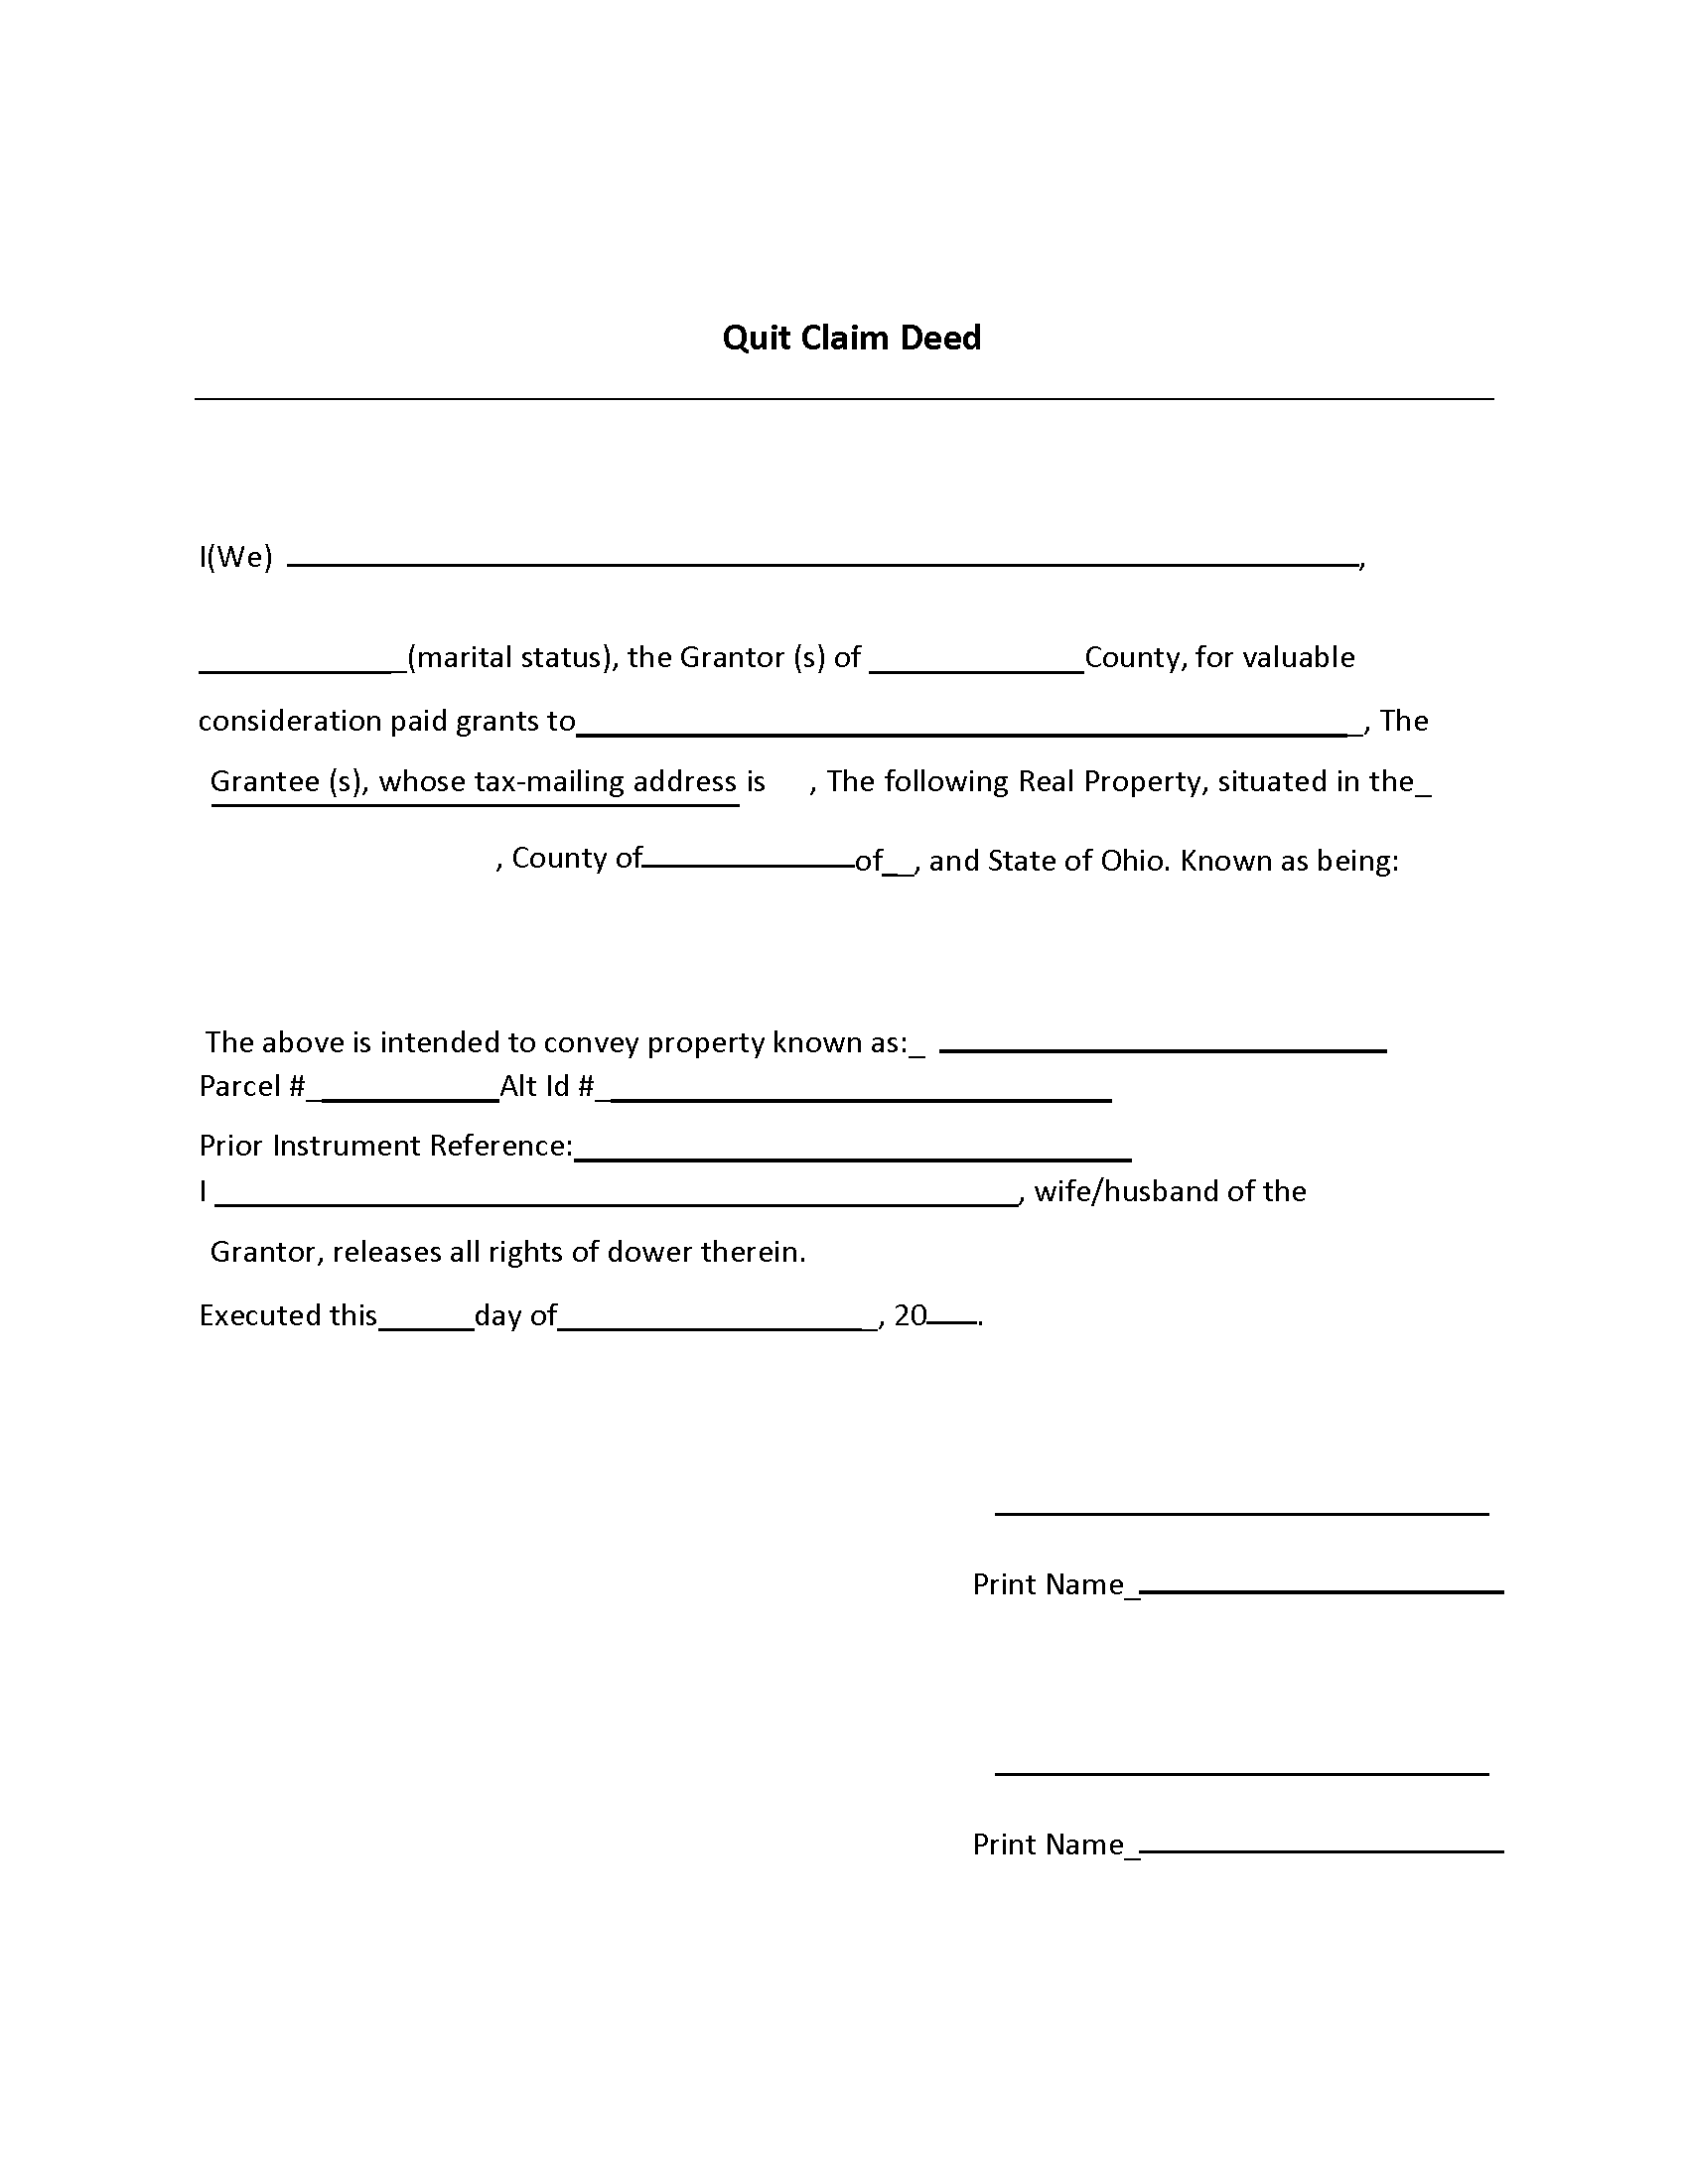 quit-claim-deed-form-ohio-2020-2021-fill-and-sign-printable-template